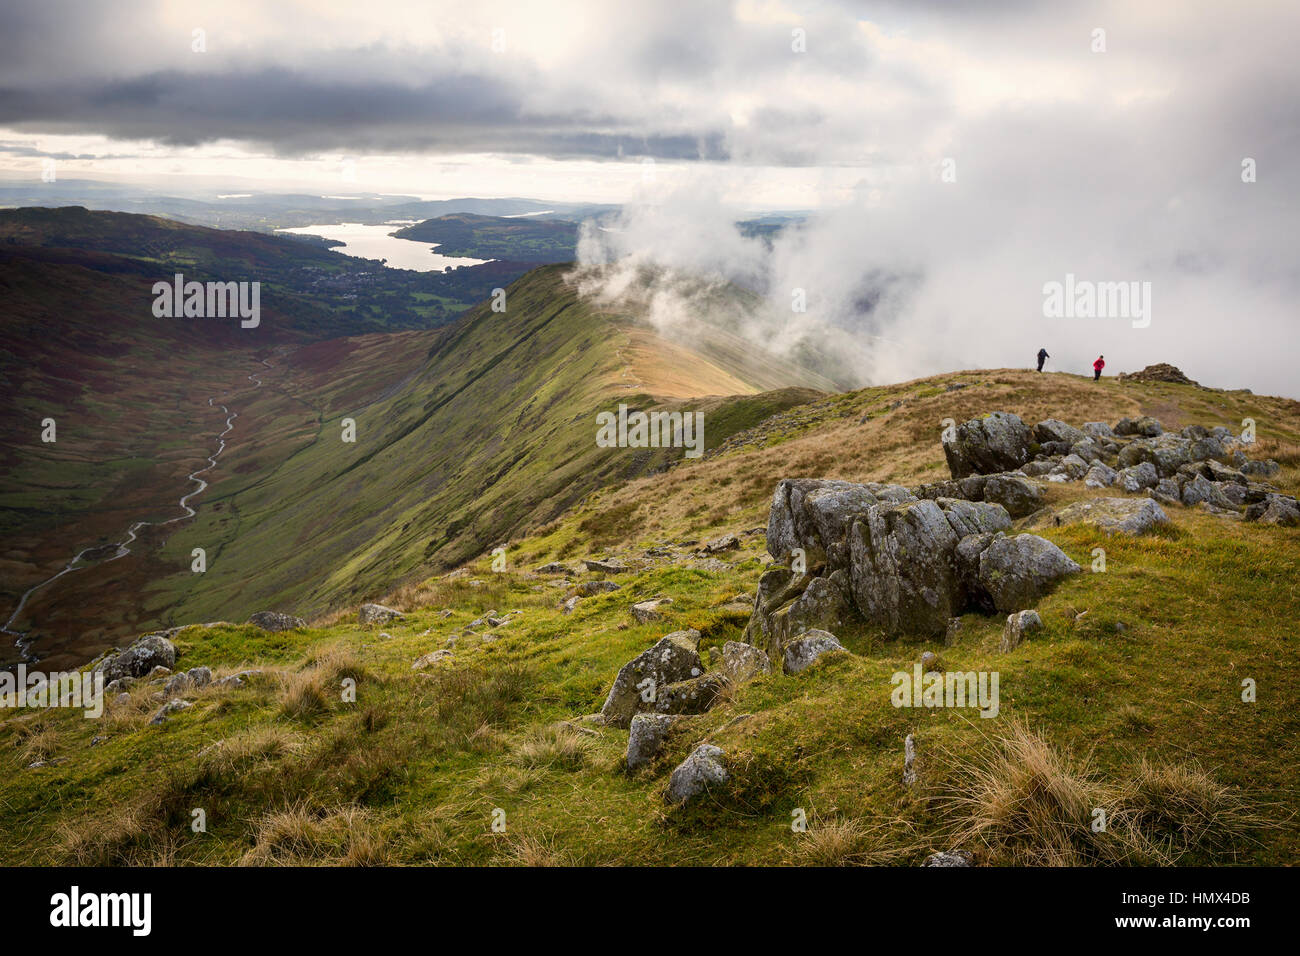 View of Rydal Fell and Lake Windermere from the top of Great Rigg on the Fairfield Horseshoe in Cumbria, UK Stock Photo